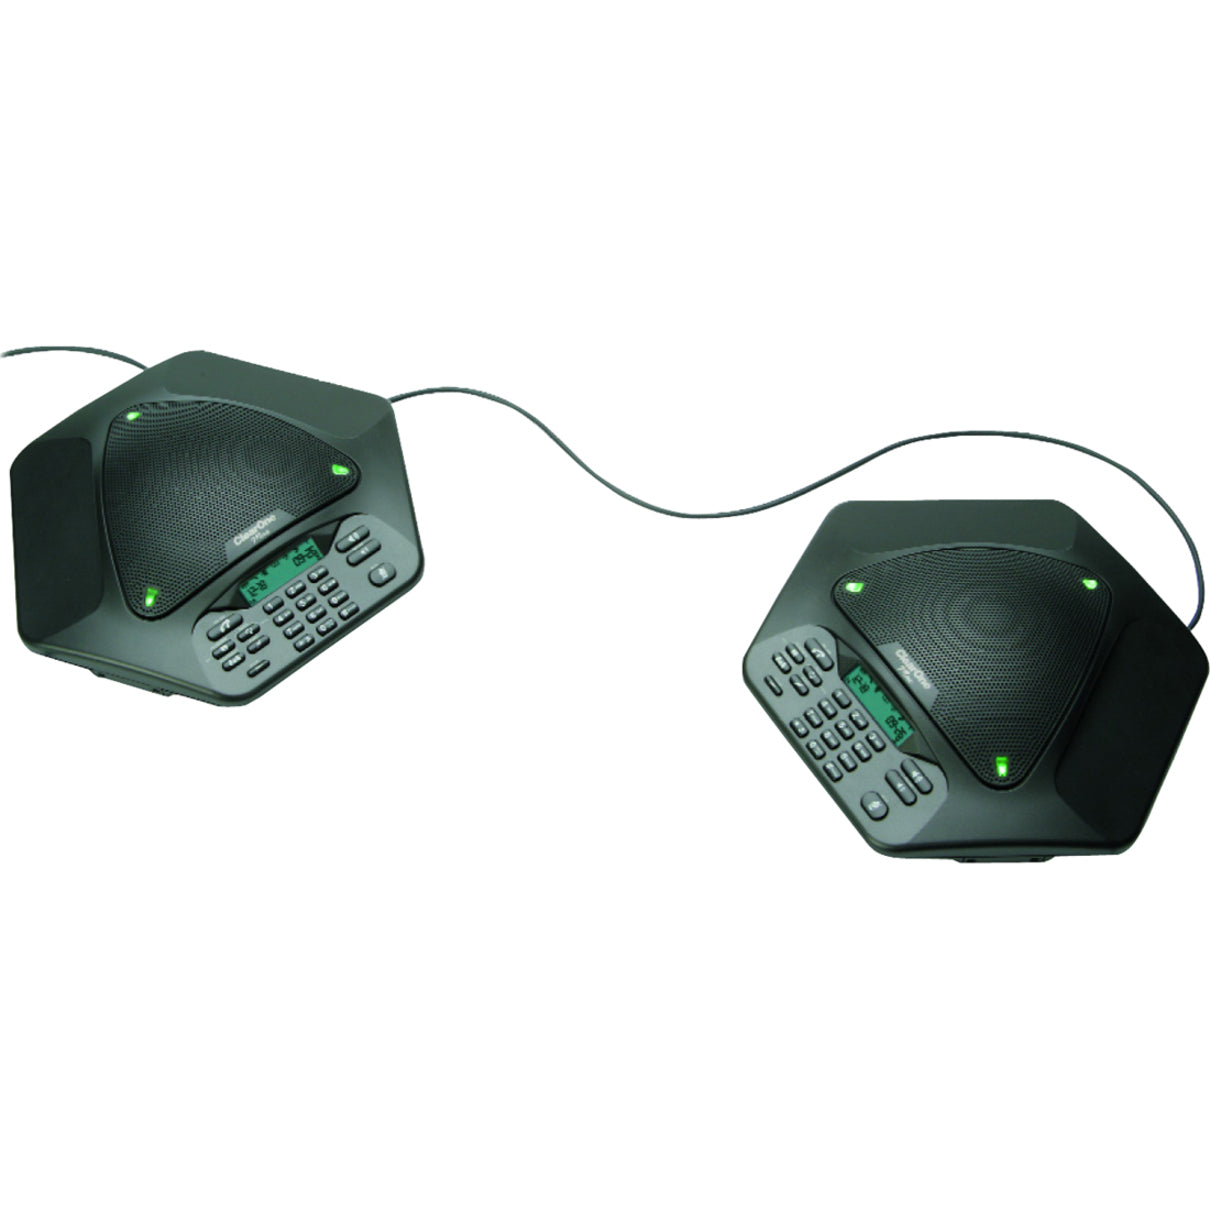 ClearOne 910-158-370 MAXAttach IP Conference Station - Desktop, Conference Call, Speed Dial, Call on Hold [Discontinued]